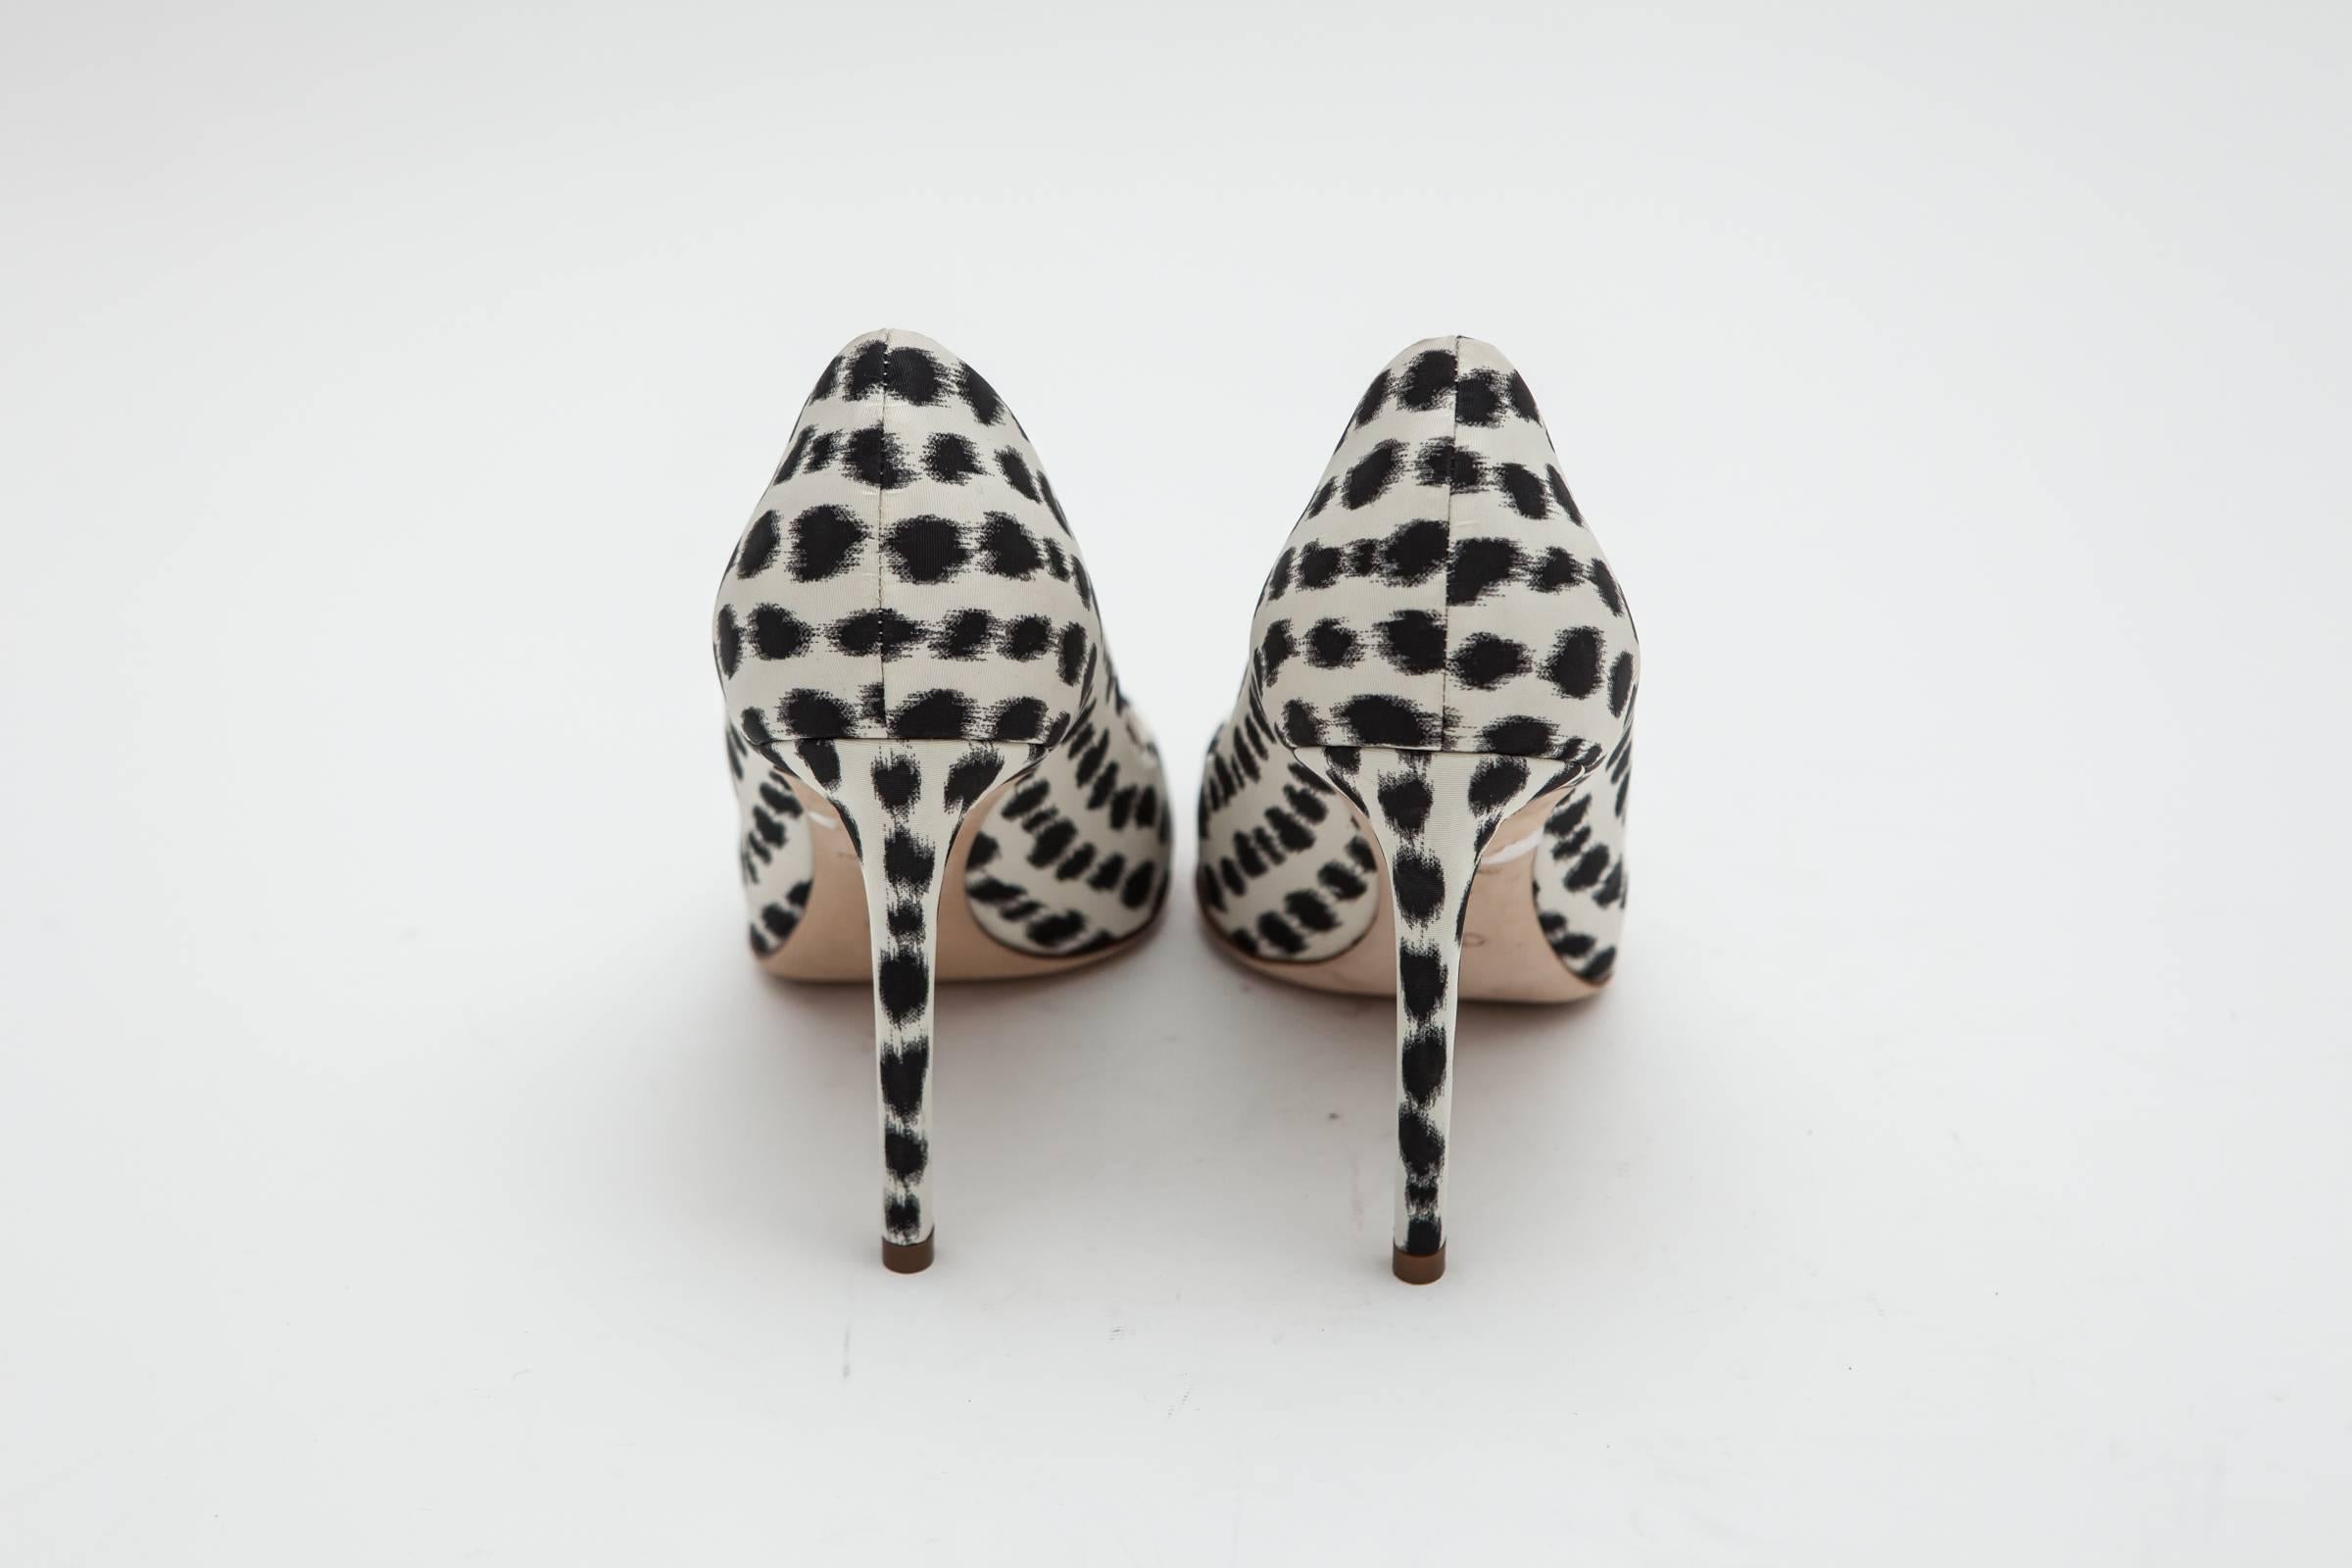 Christian Dior Ivory and Black Patterned Pumps 1